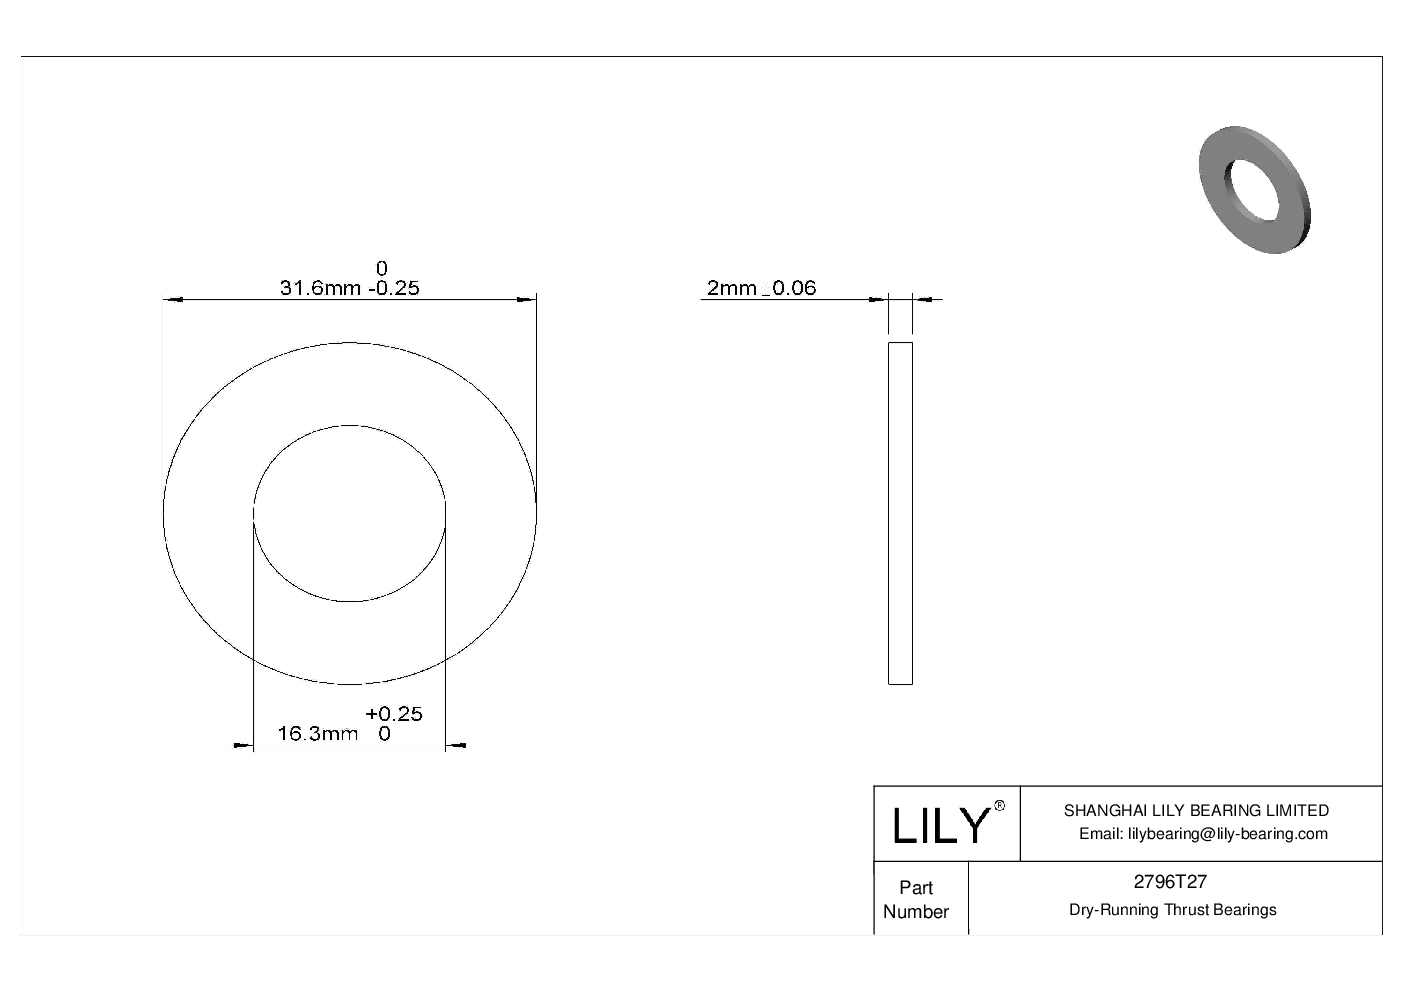 CHJGTCH Ultra-Low-Friction Dry-Running Thrust Bearings cad drawing